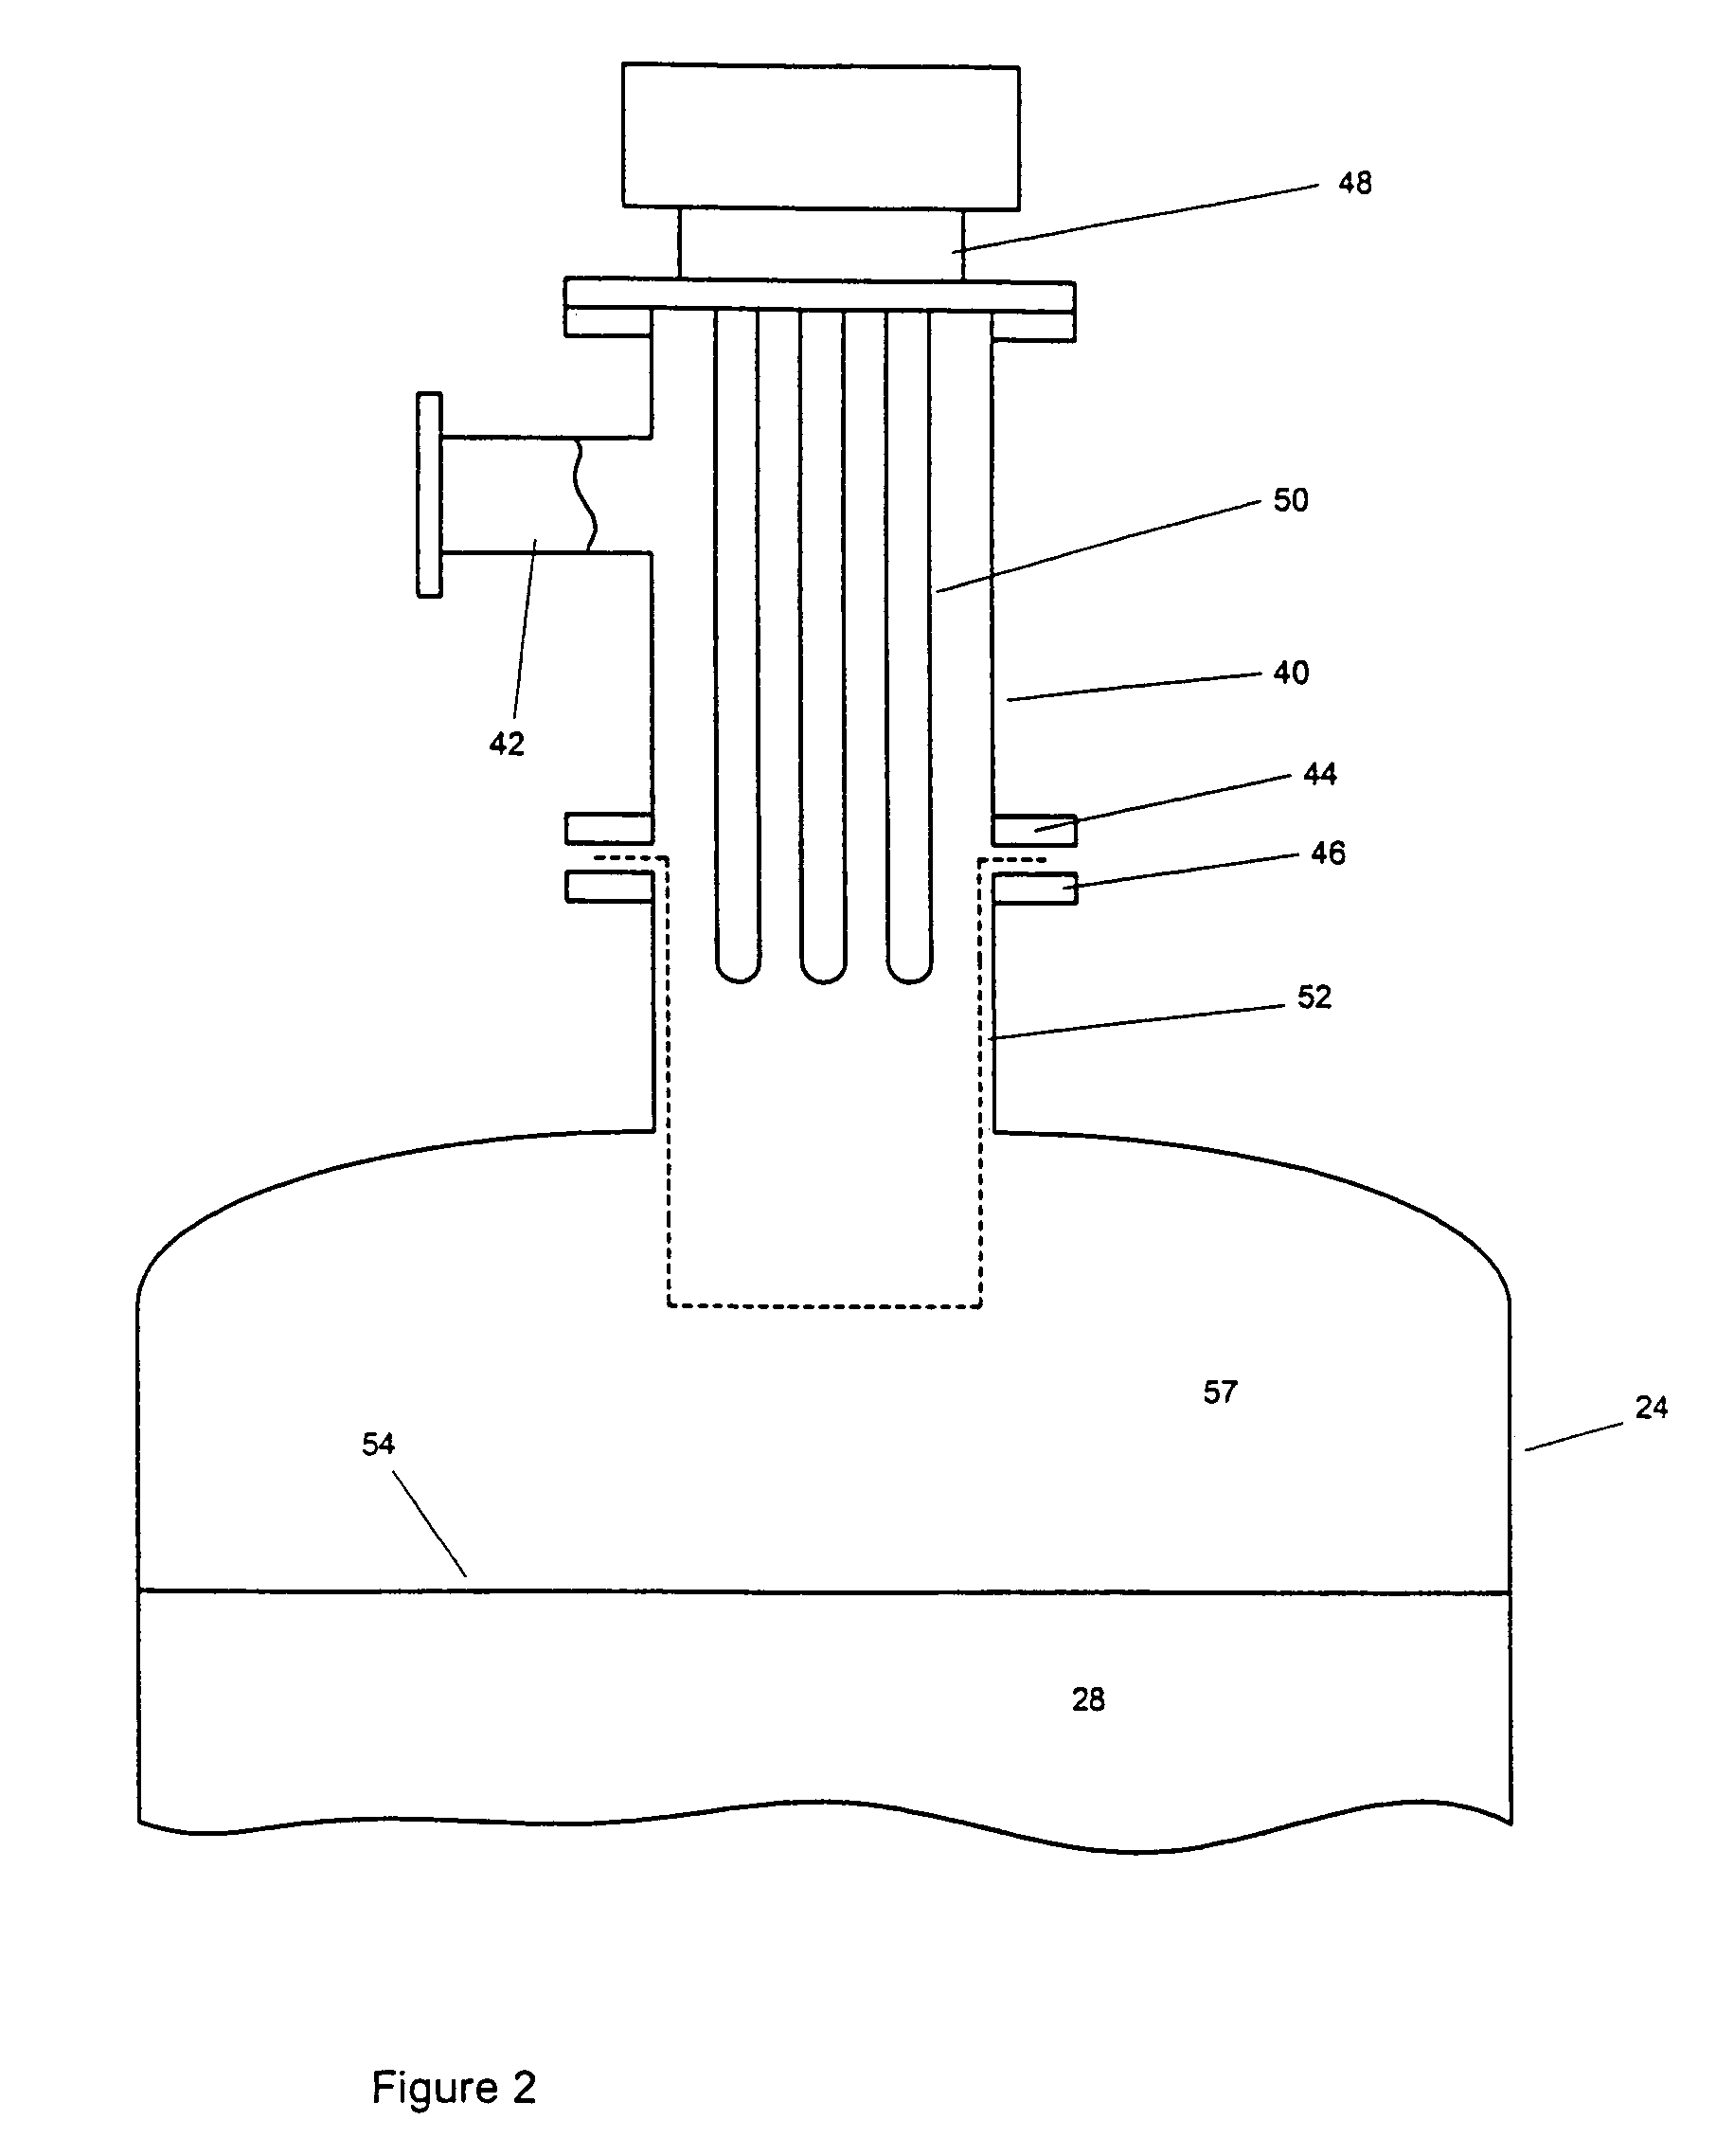 Apparatus for use in regenerating adsorbent